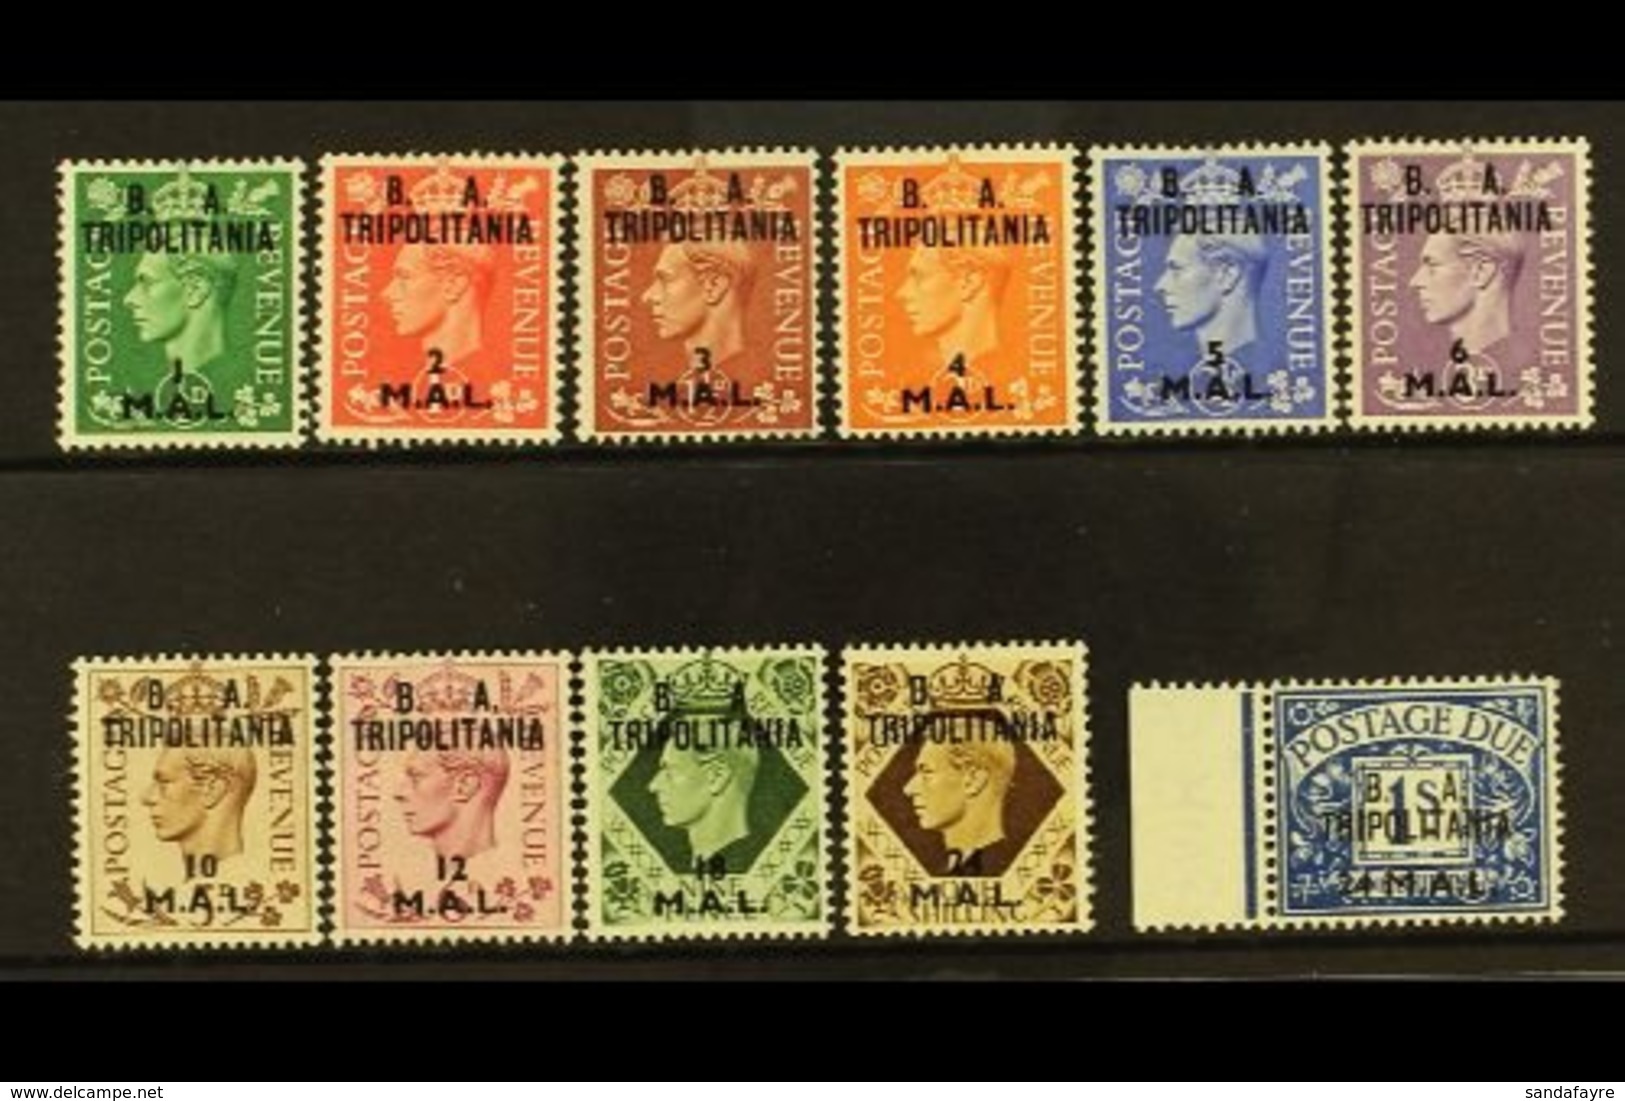 TRIPOLITANIA  1950 "B.A." Set To 24L On 1s (SG T14/23), Plus 24L On 1s Postage Due (SG TD10), Very Fine Mint. (11 Stamps - Italian Eastern Africa